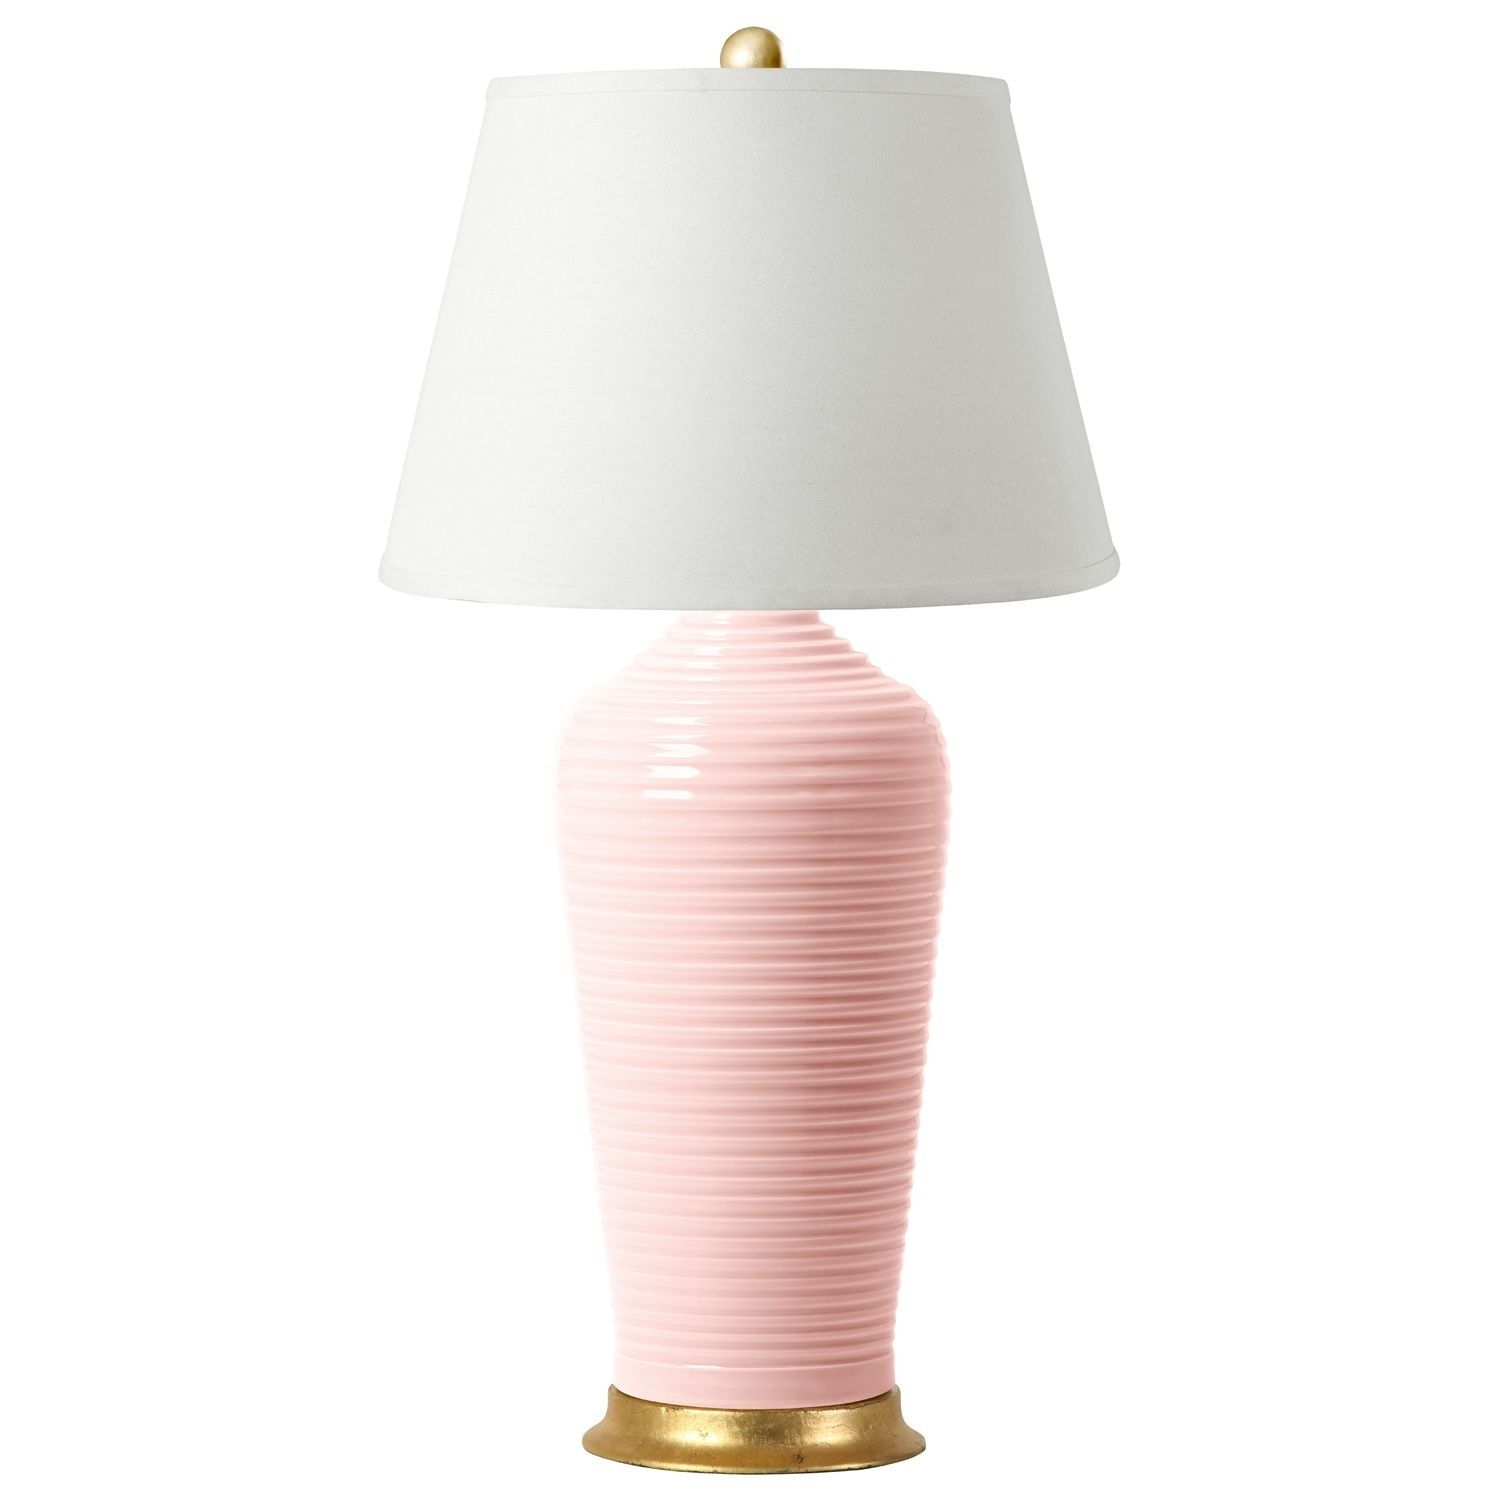 Remarkableable Lamps For Living Roomraditional Modern Cordless At For Pink Table Lamps For Living Room (View 7 of 15)